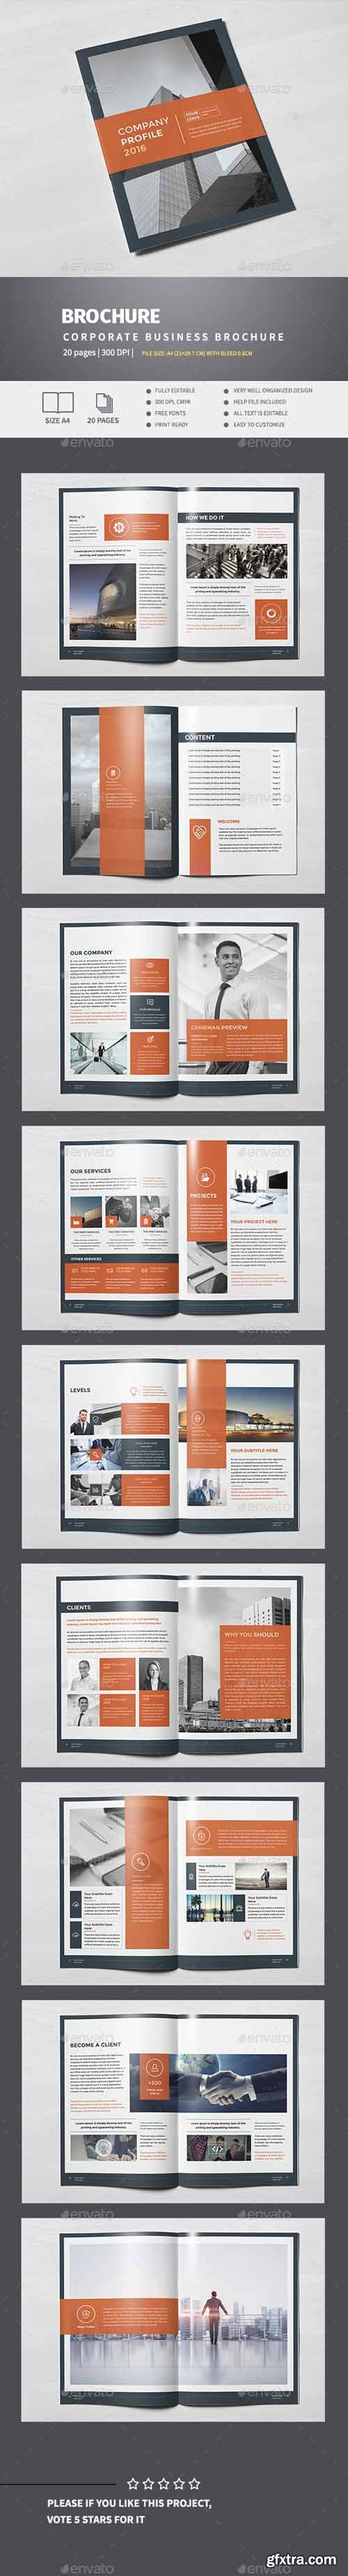 GR - Corporate Business Brochure 20 Pages 15562884